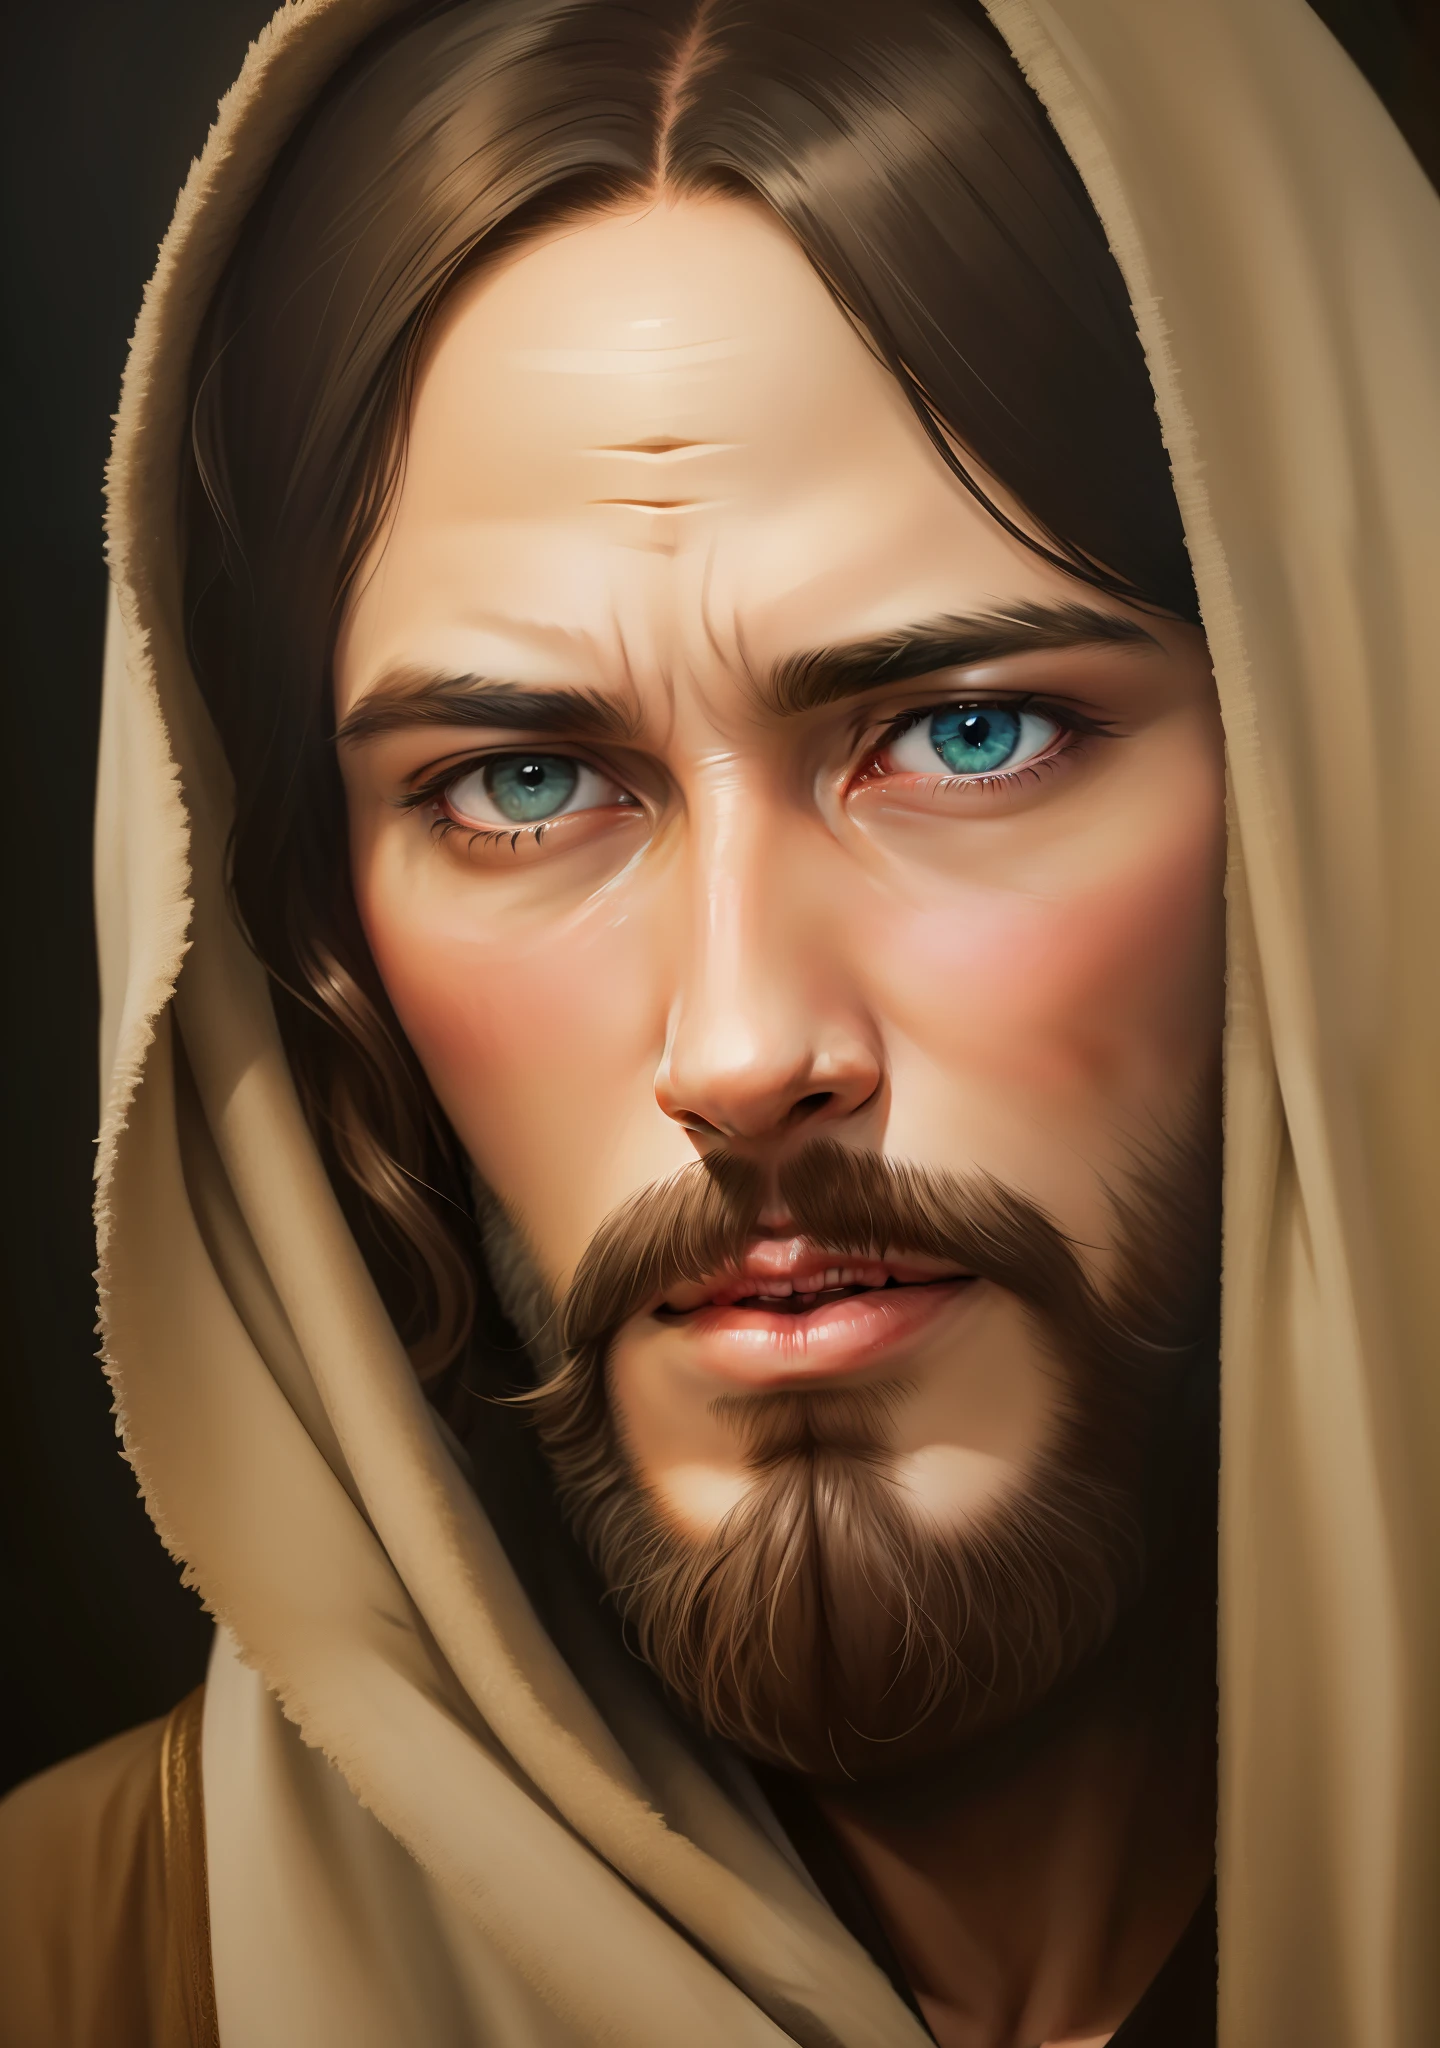 A painting of jesus with blue eyes and a beard - SeaArt AI